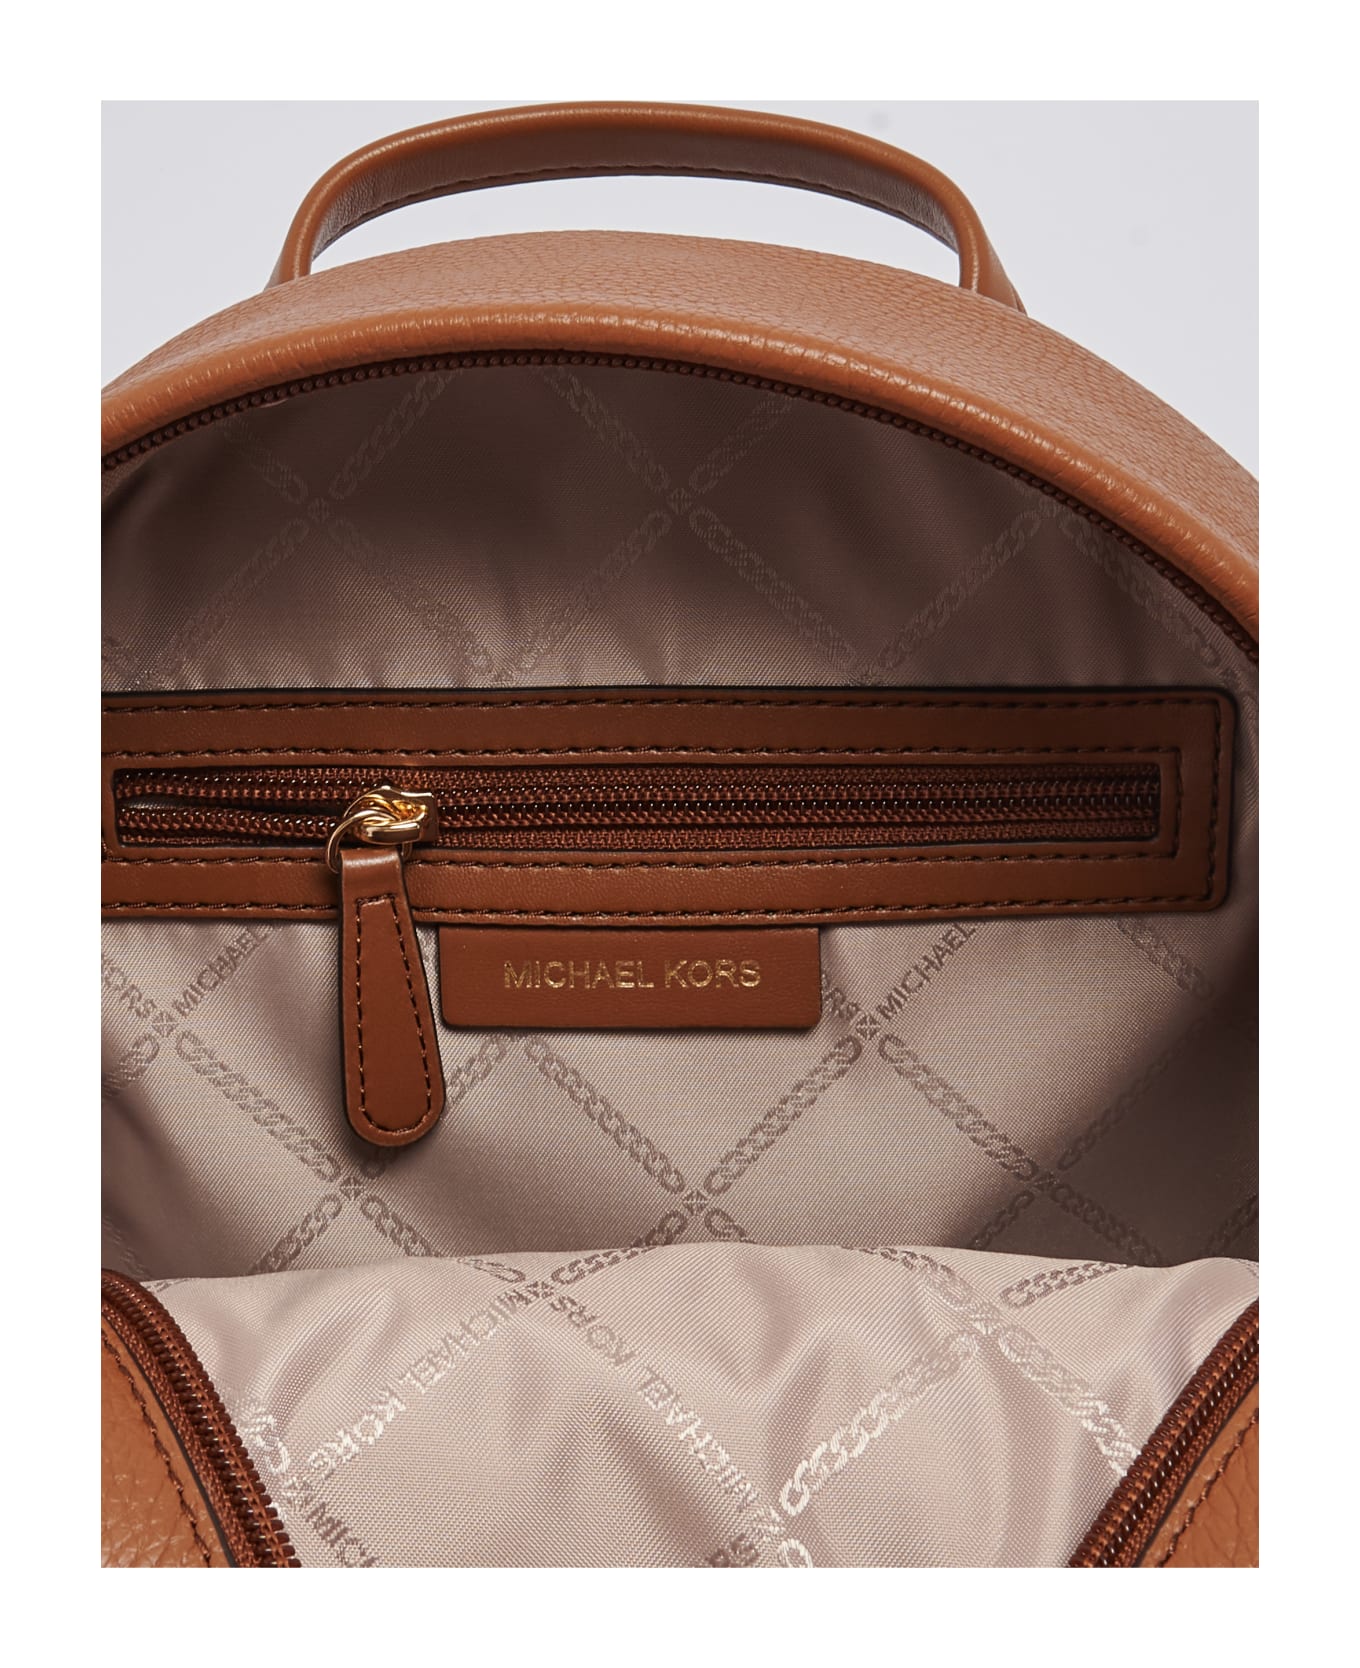 Michael Kors Md Backpack Backpack - CUOIO